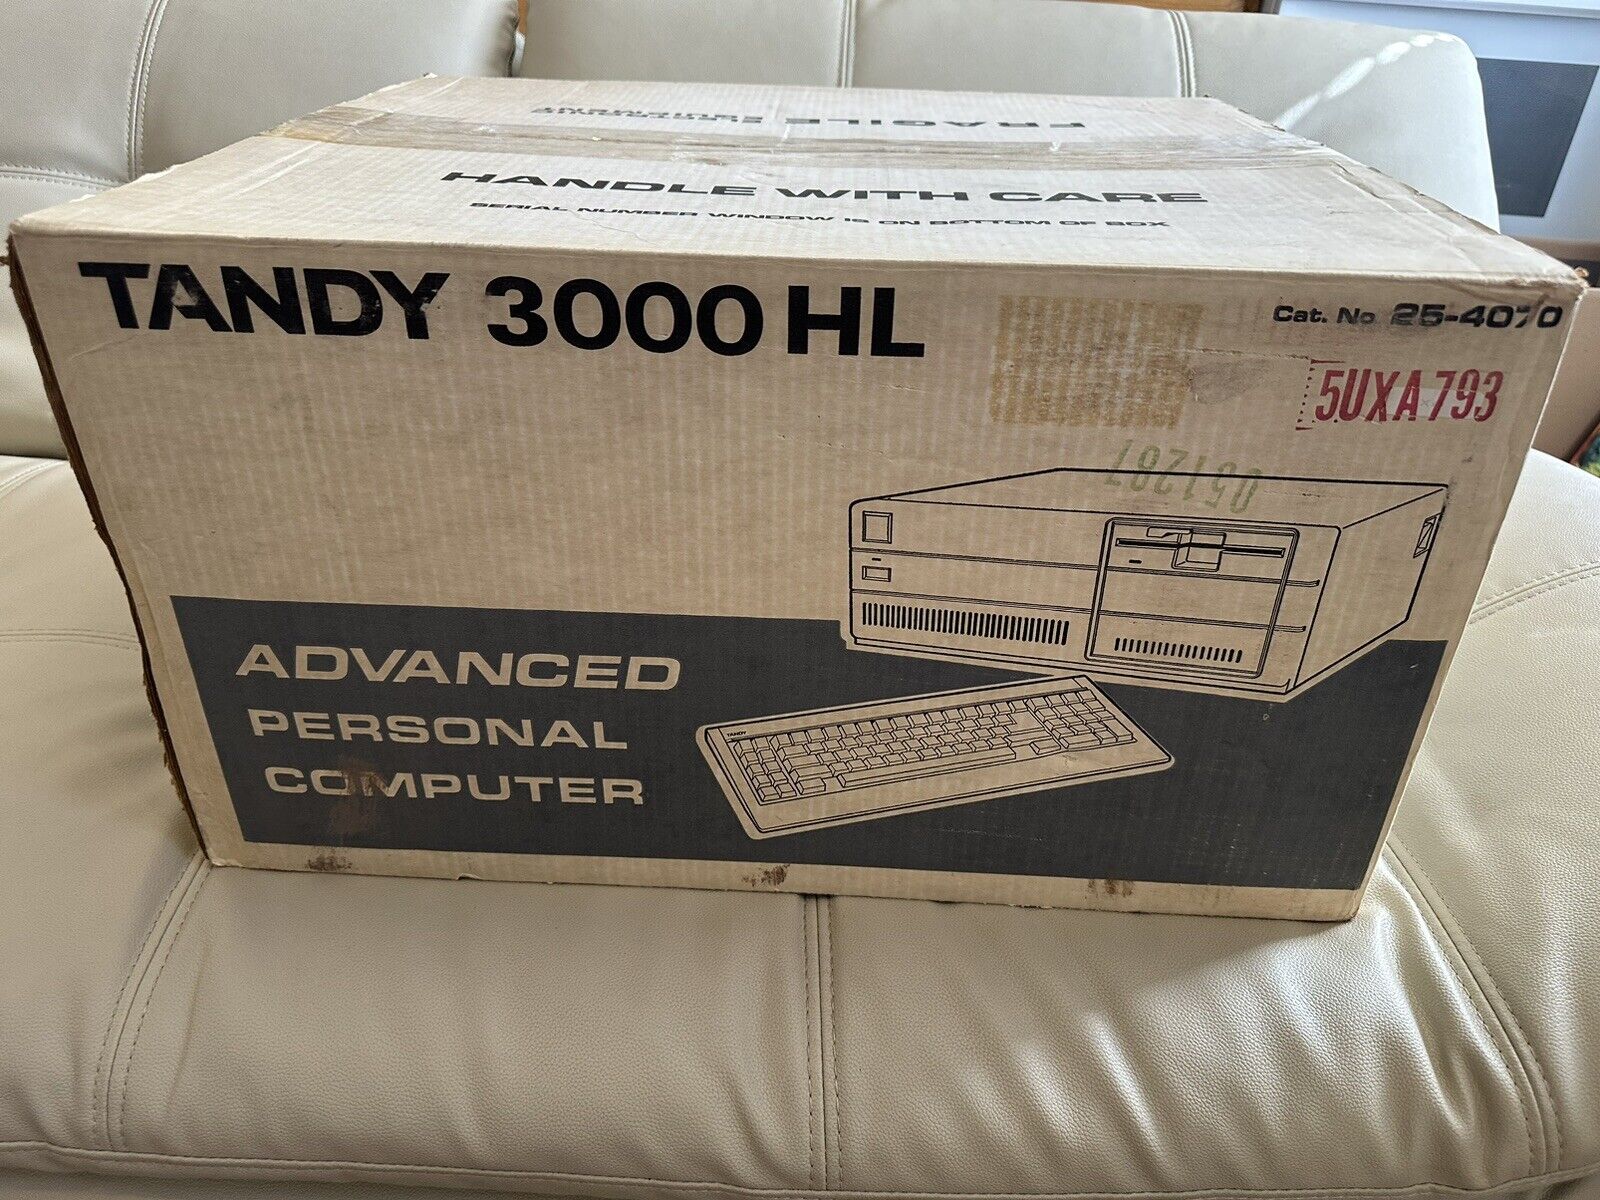 Tandy 3000 HL 1980s Vintage Personal Computer Cat. No 25-4070 NEW IN BOX RARE